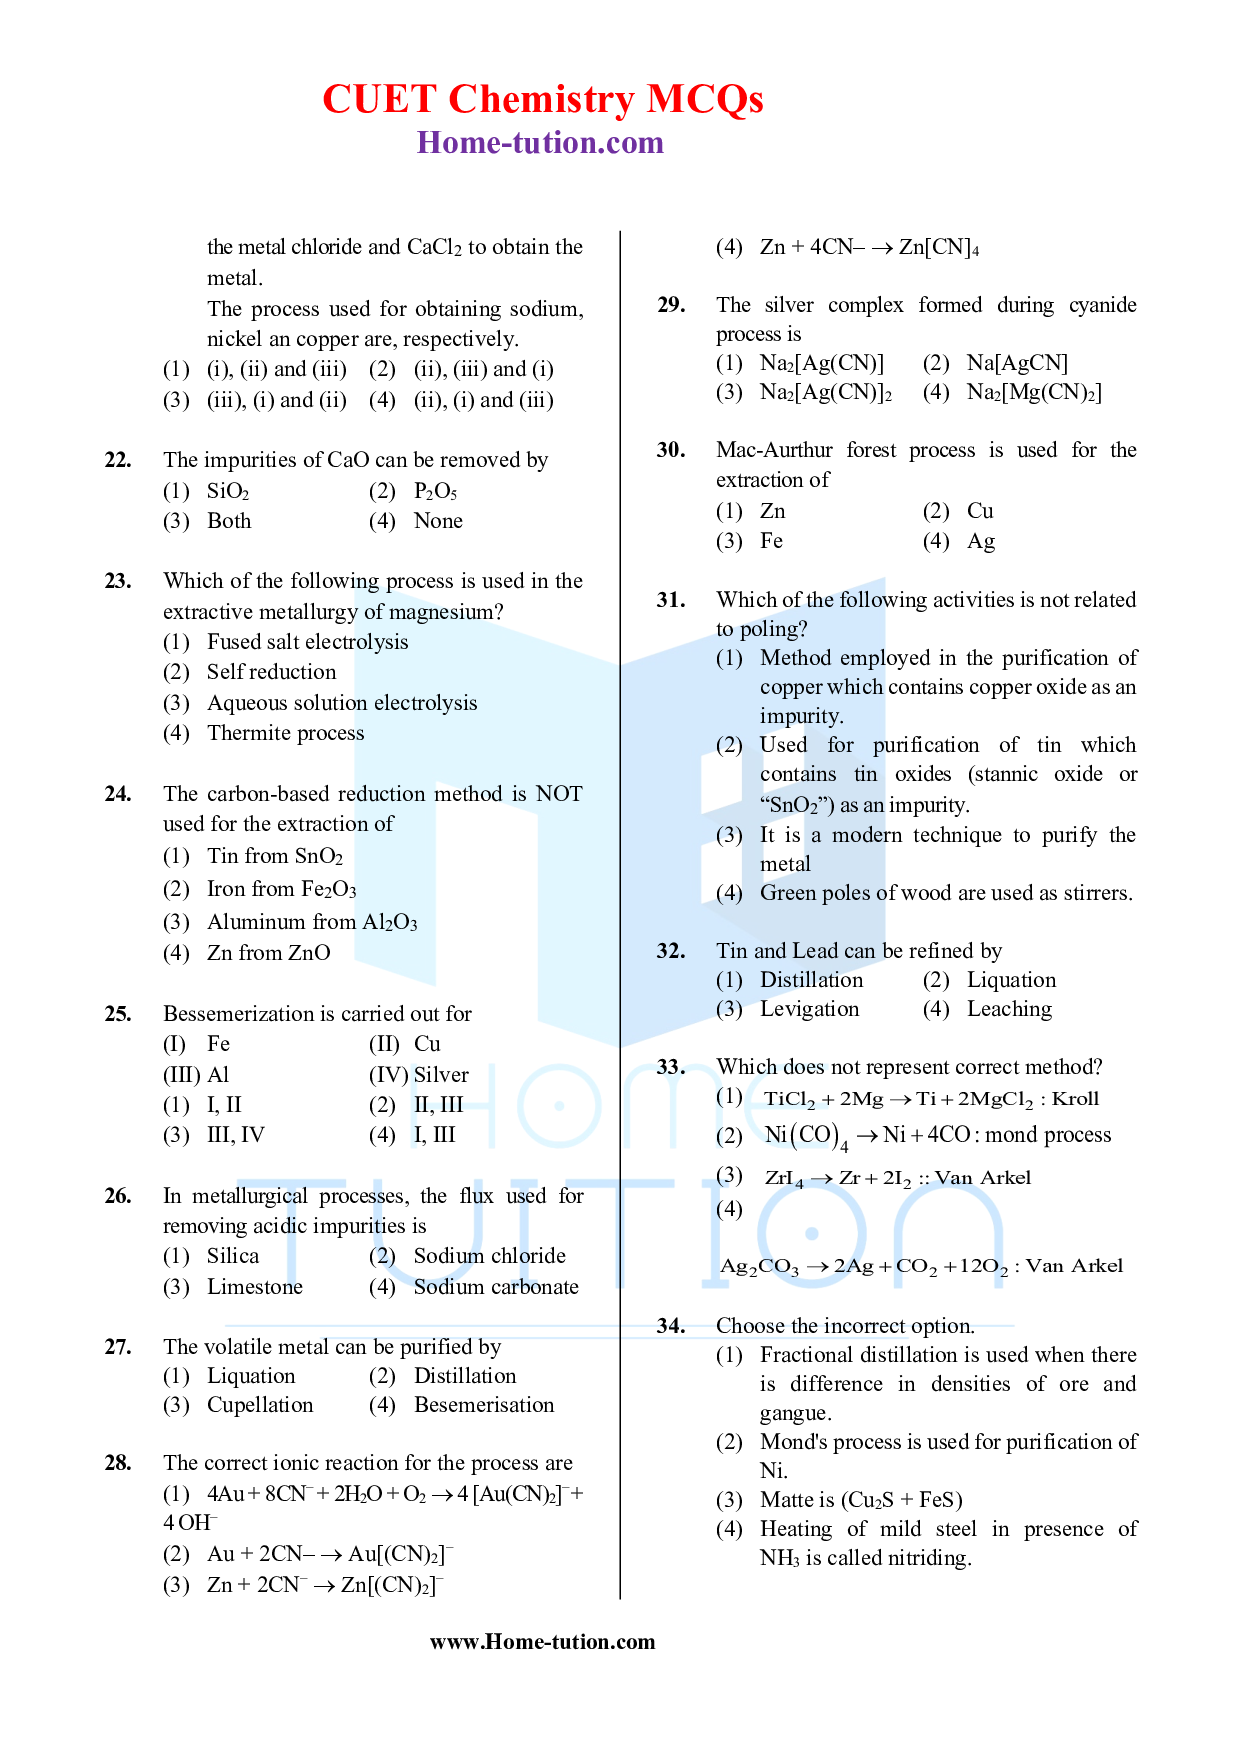 CUET MCQ Questions For Chapter-06 General Principles and Processes of Isolation of Elements